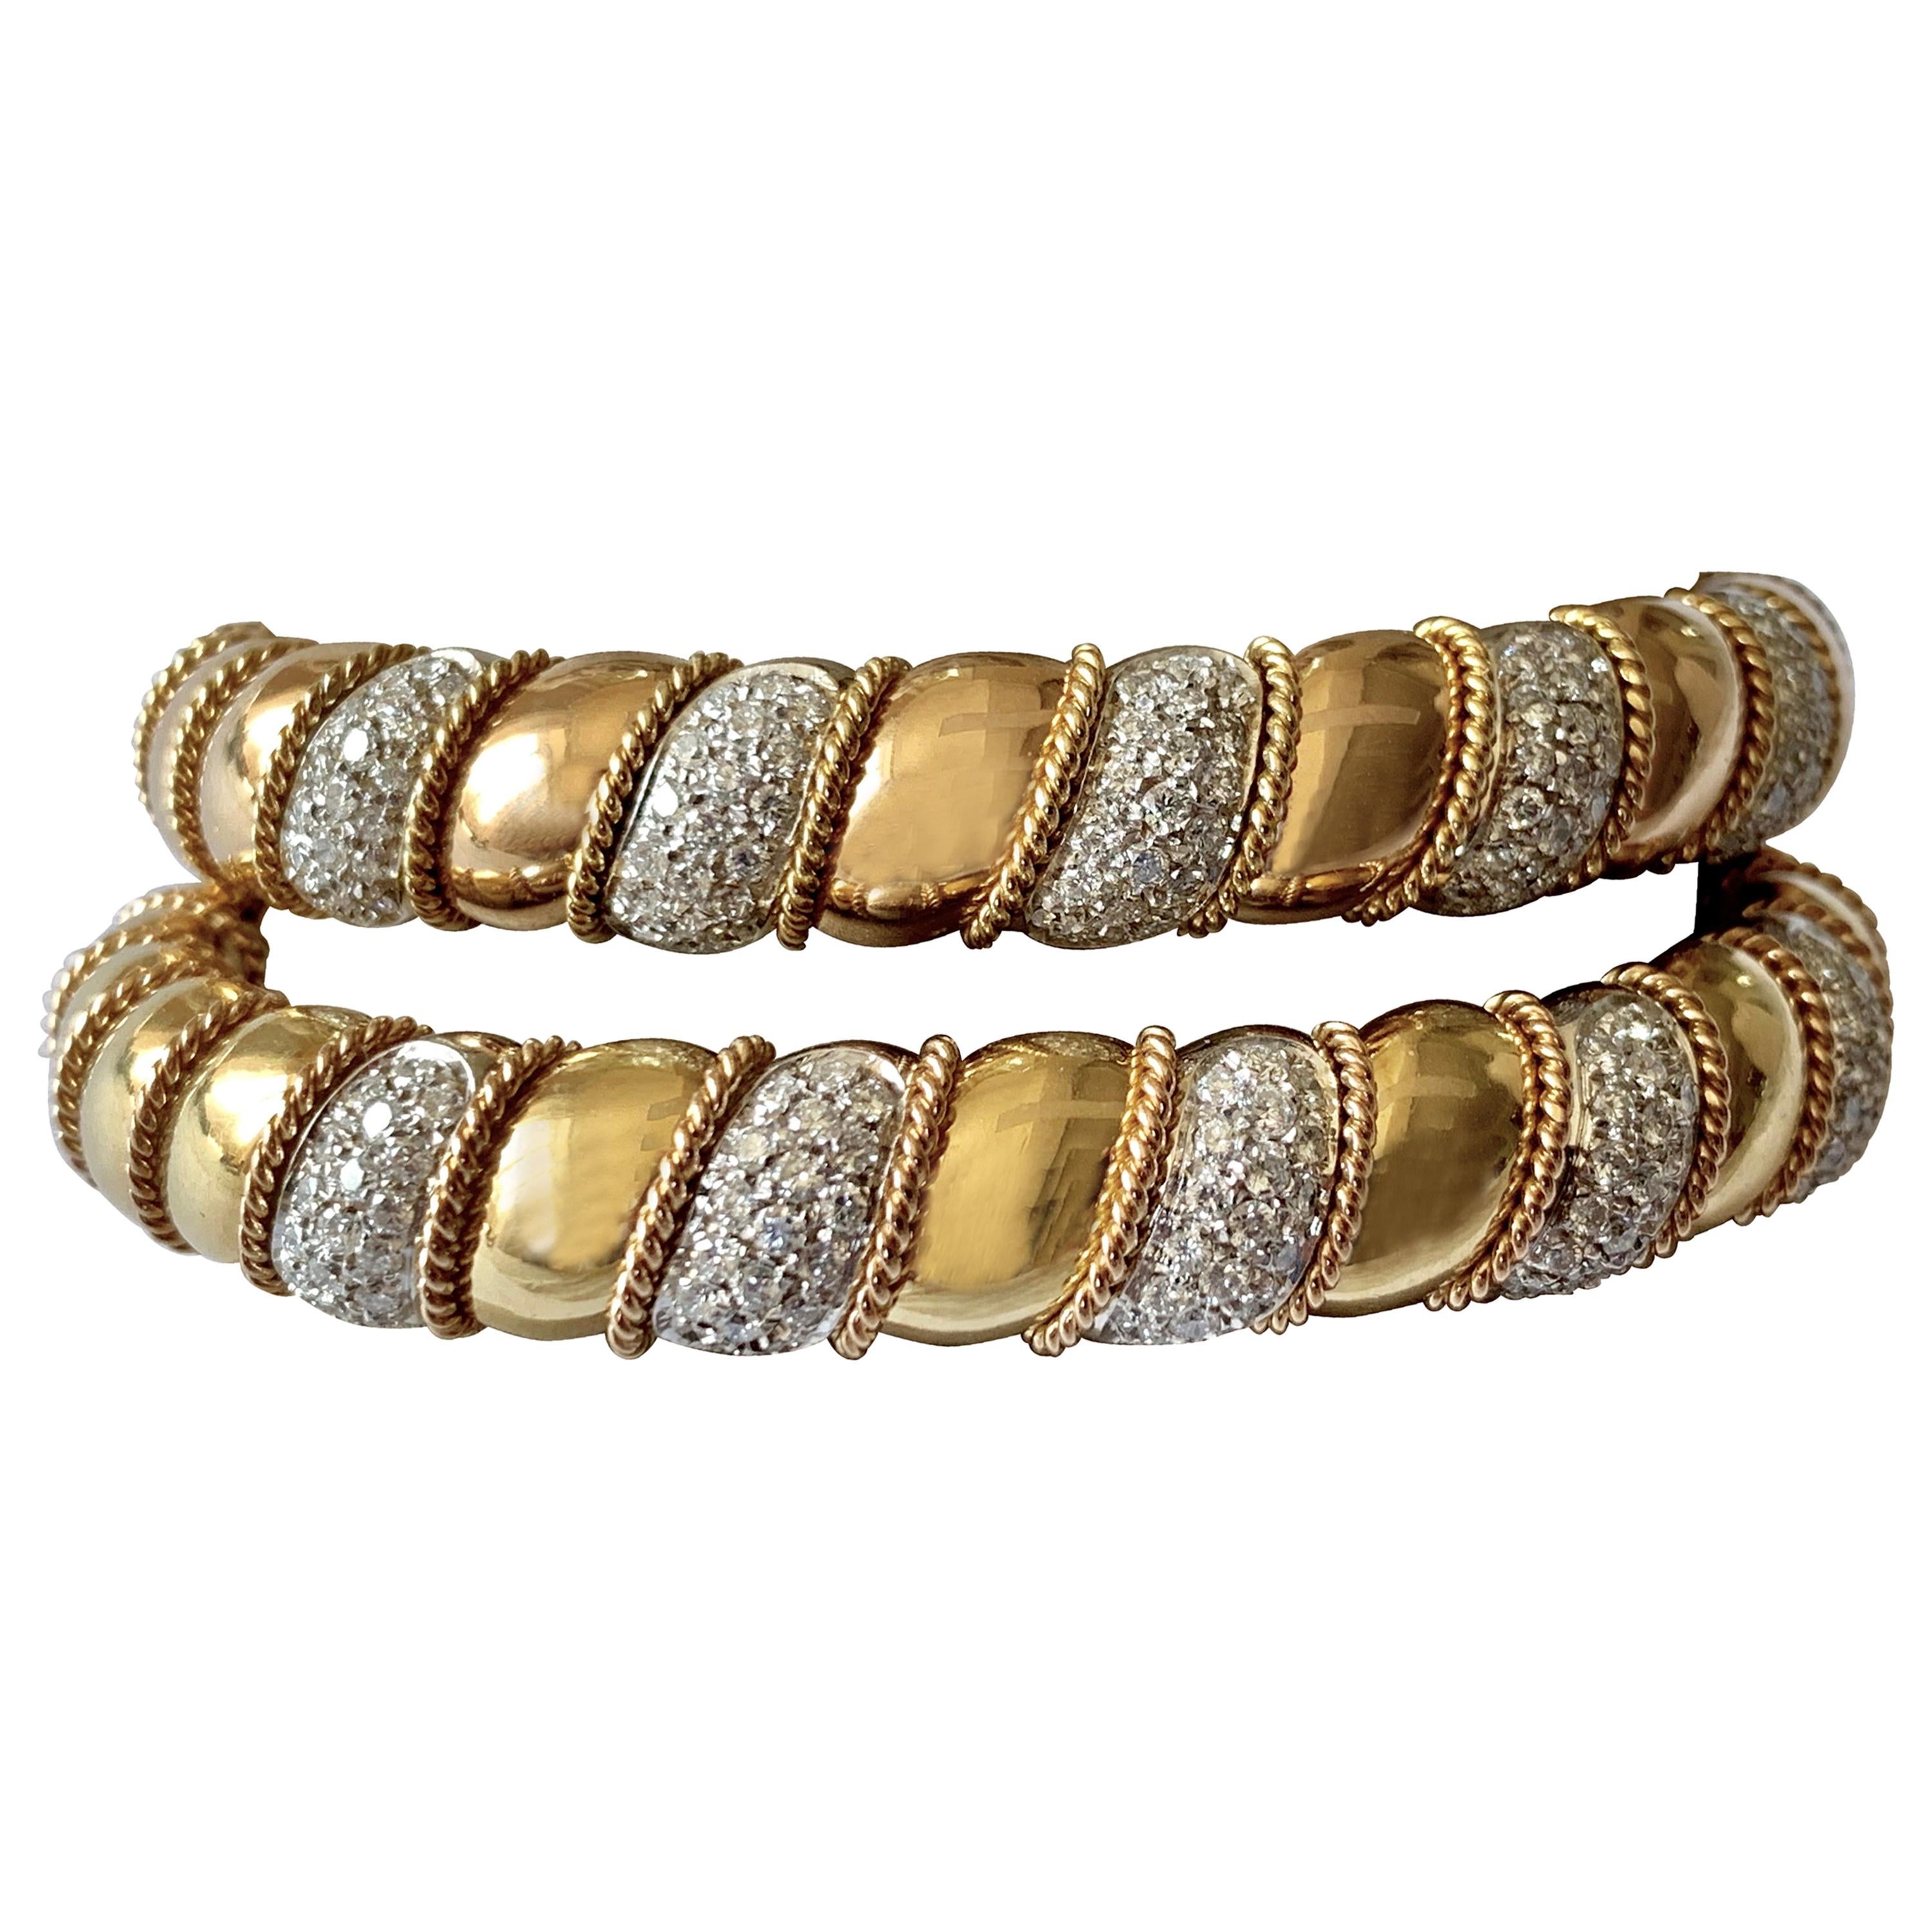 Set of Solid Yellow and White Gold Cuff Bracelet